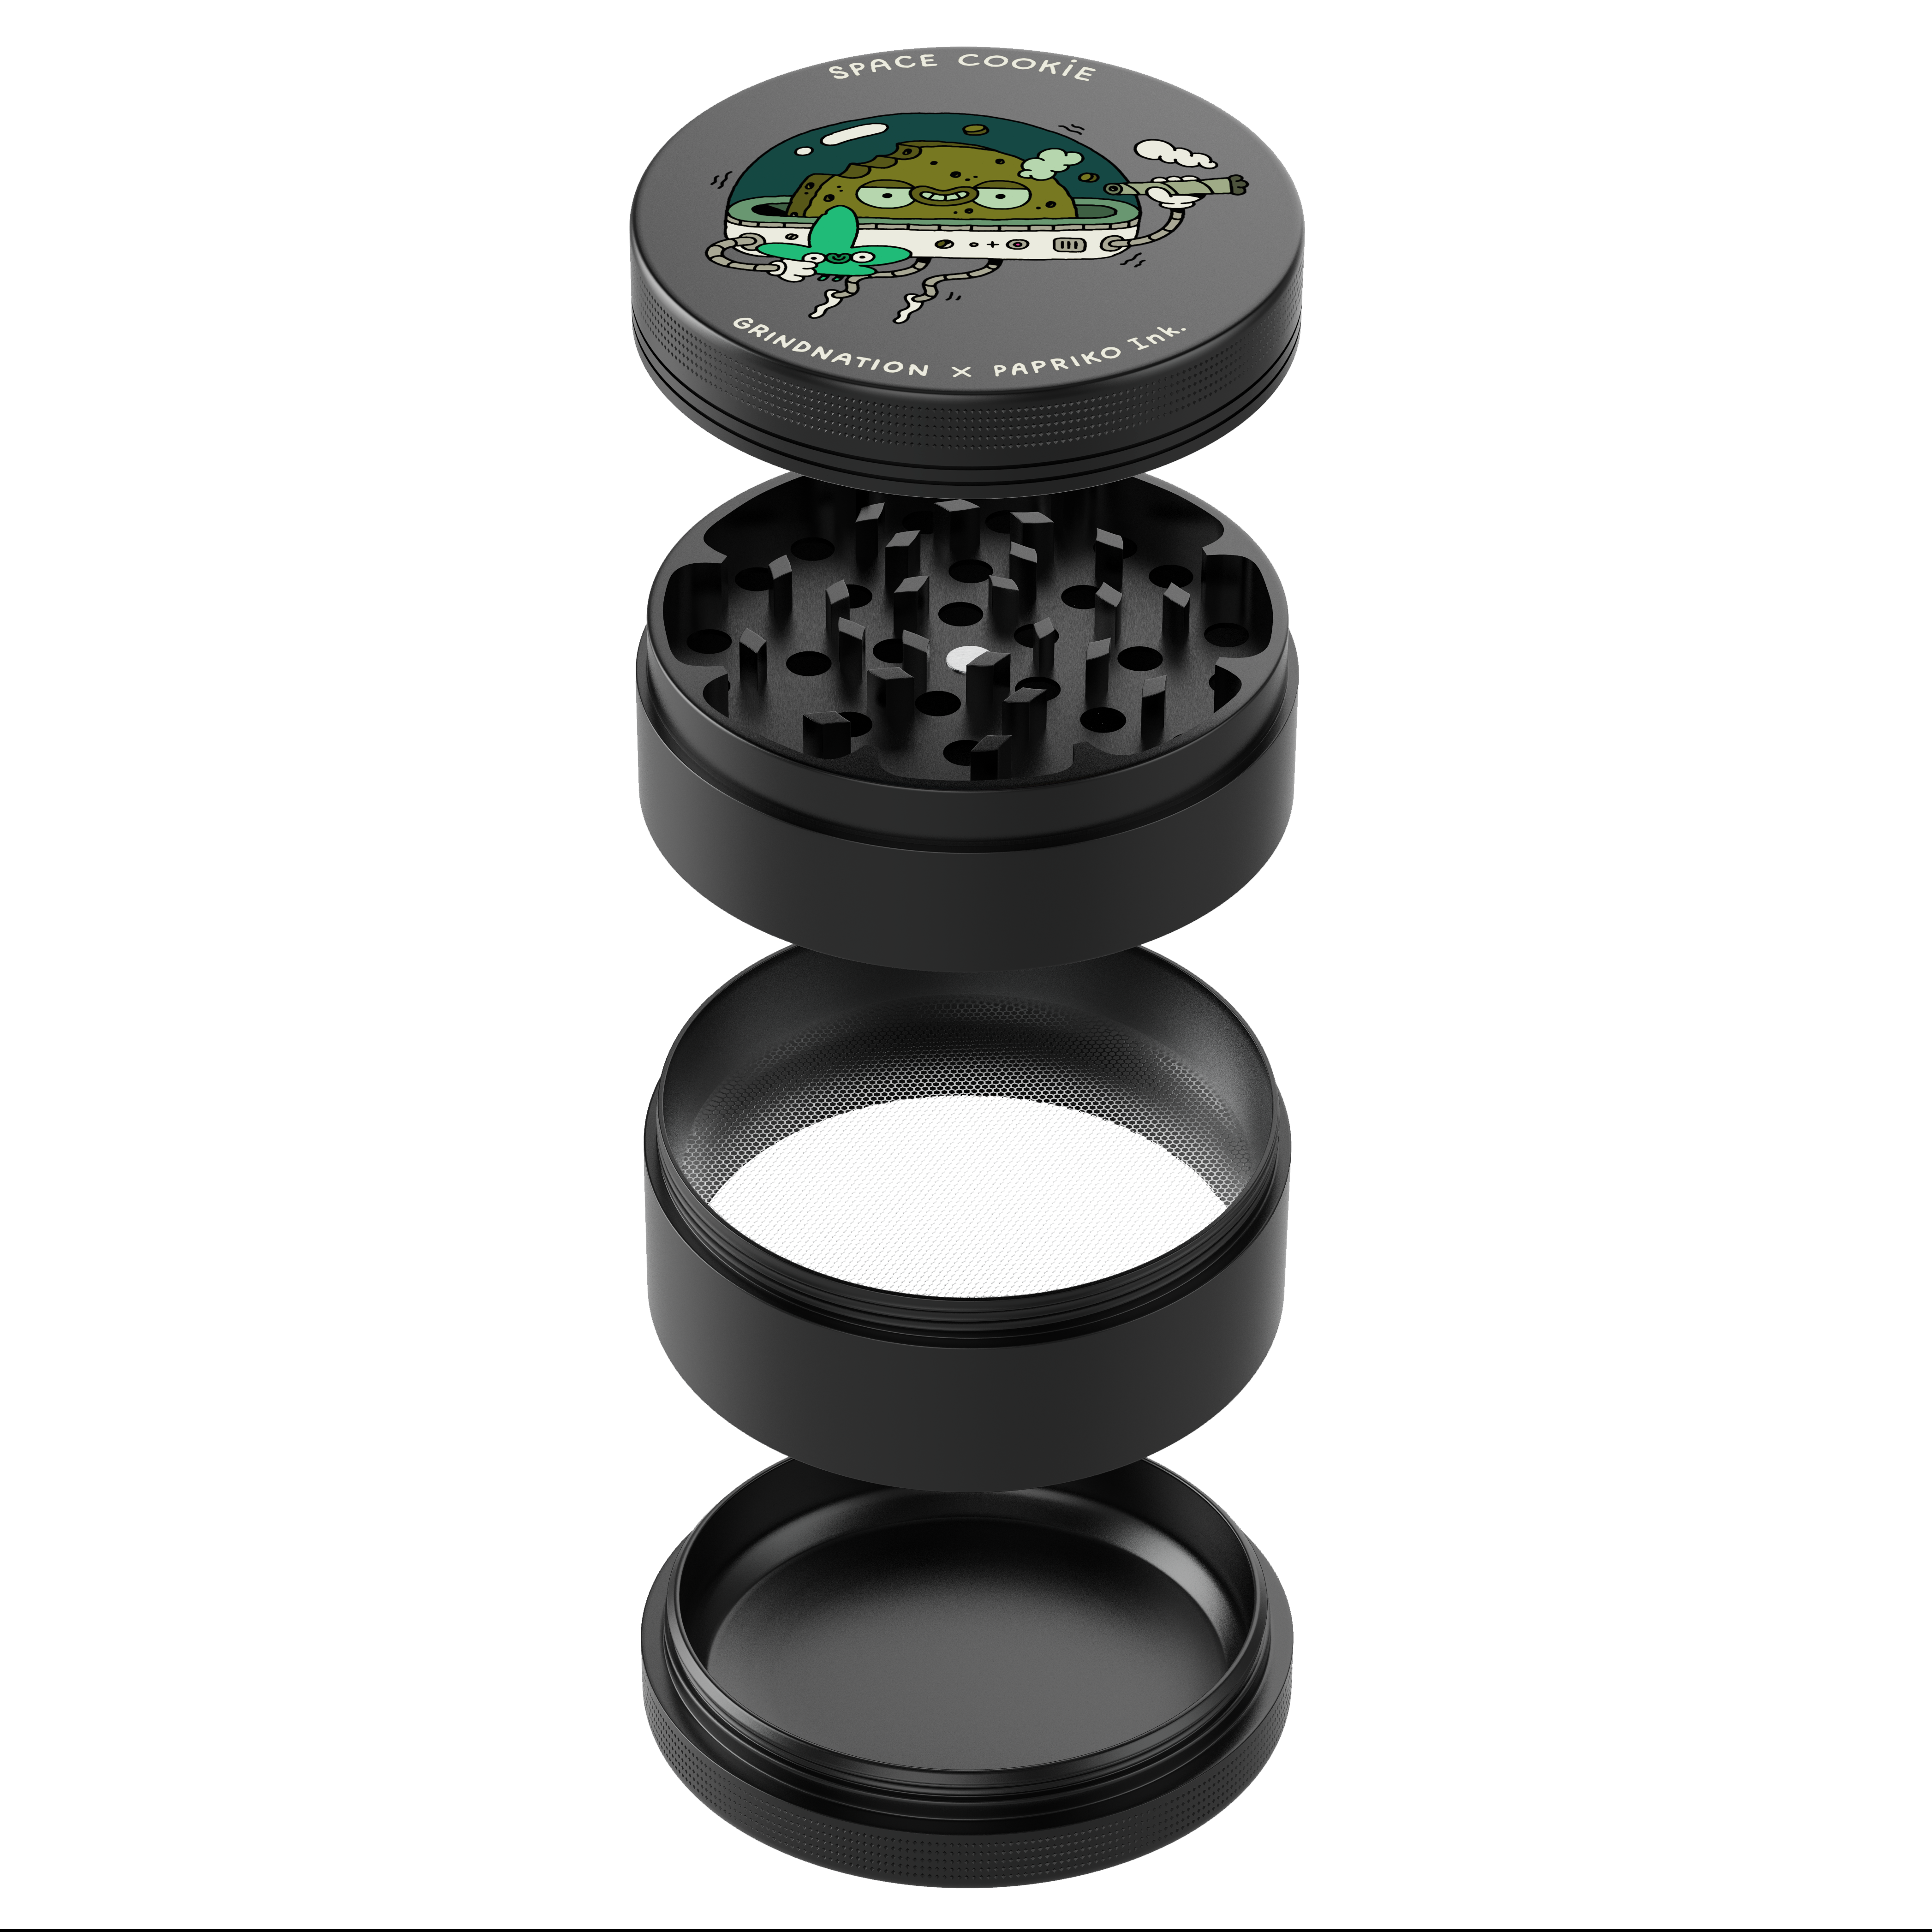 Grinder "Space Cookie" LIMITED EDITION